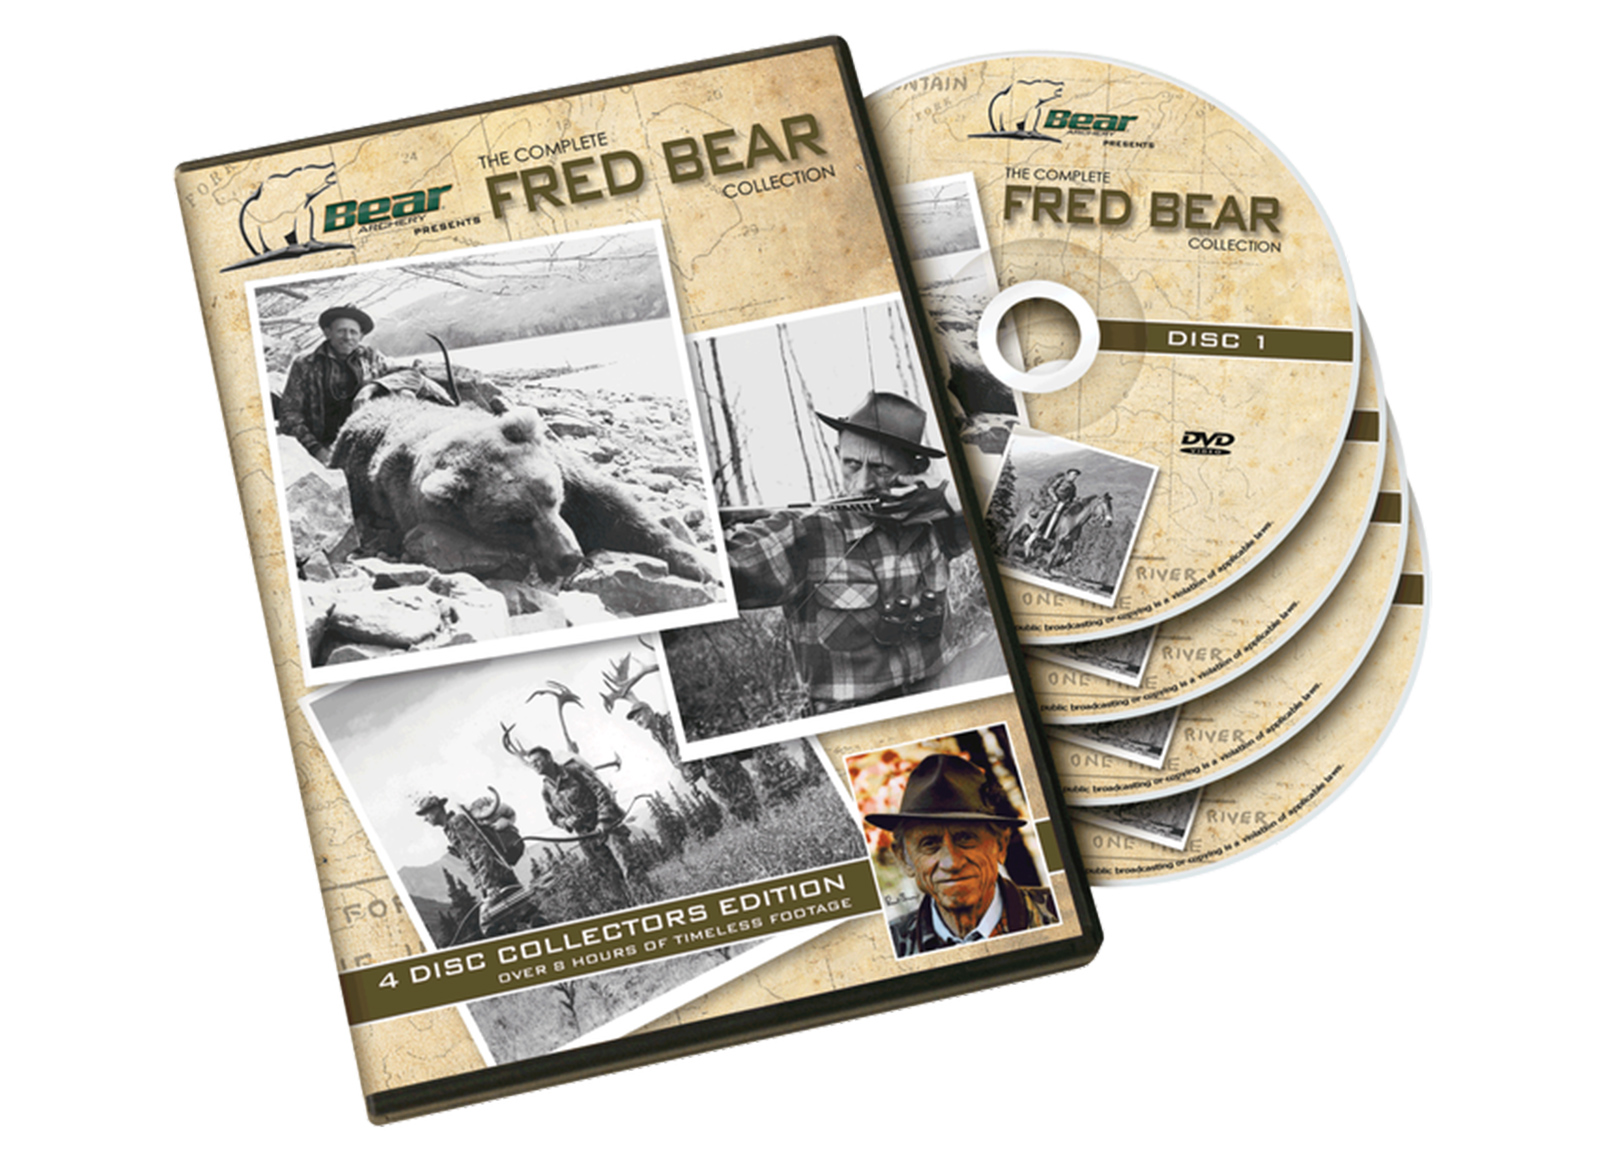 FRED BEAR DVD COLLECTORS EDITION